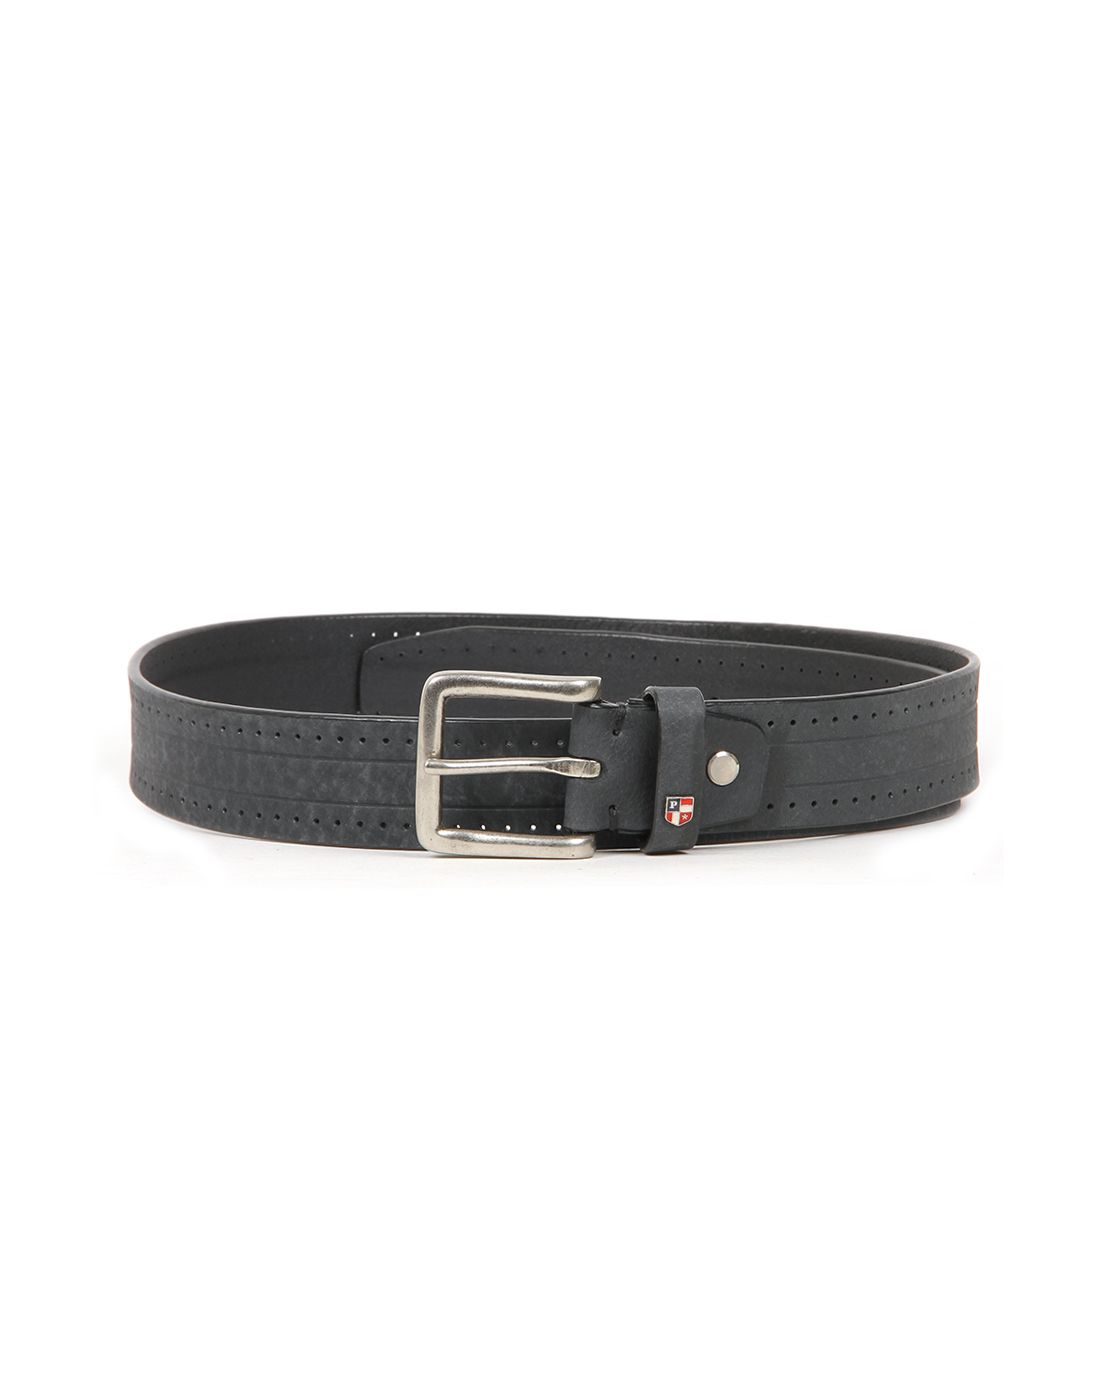 U.S. Polo Assn. Black Leather Casual Belts: Buy Online at Low Price in